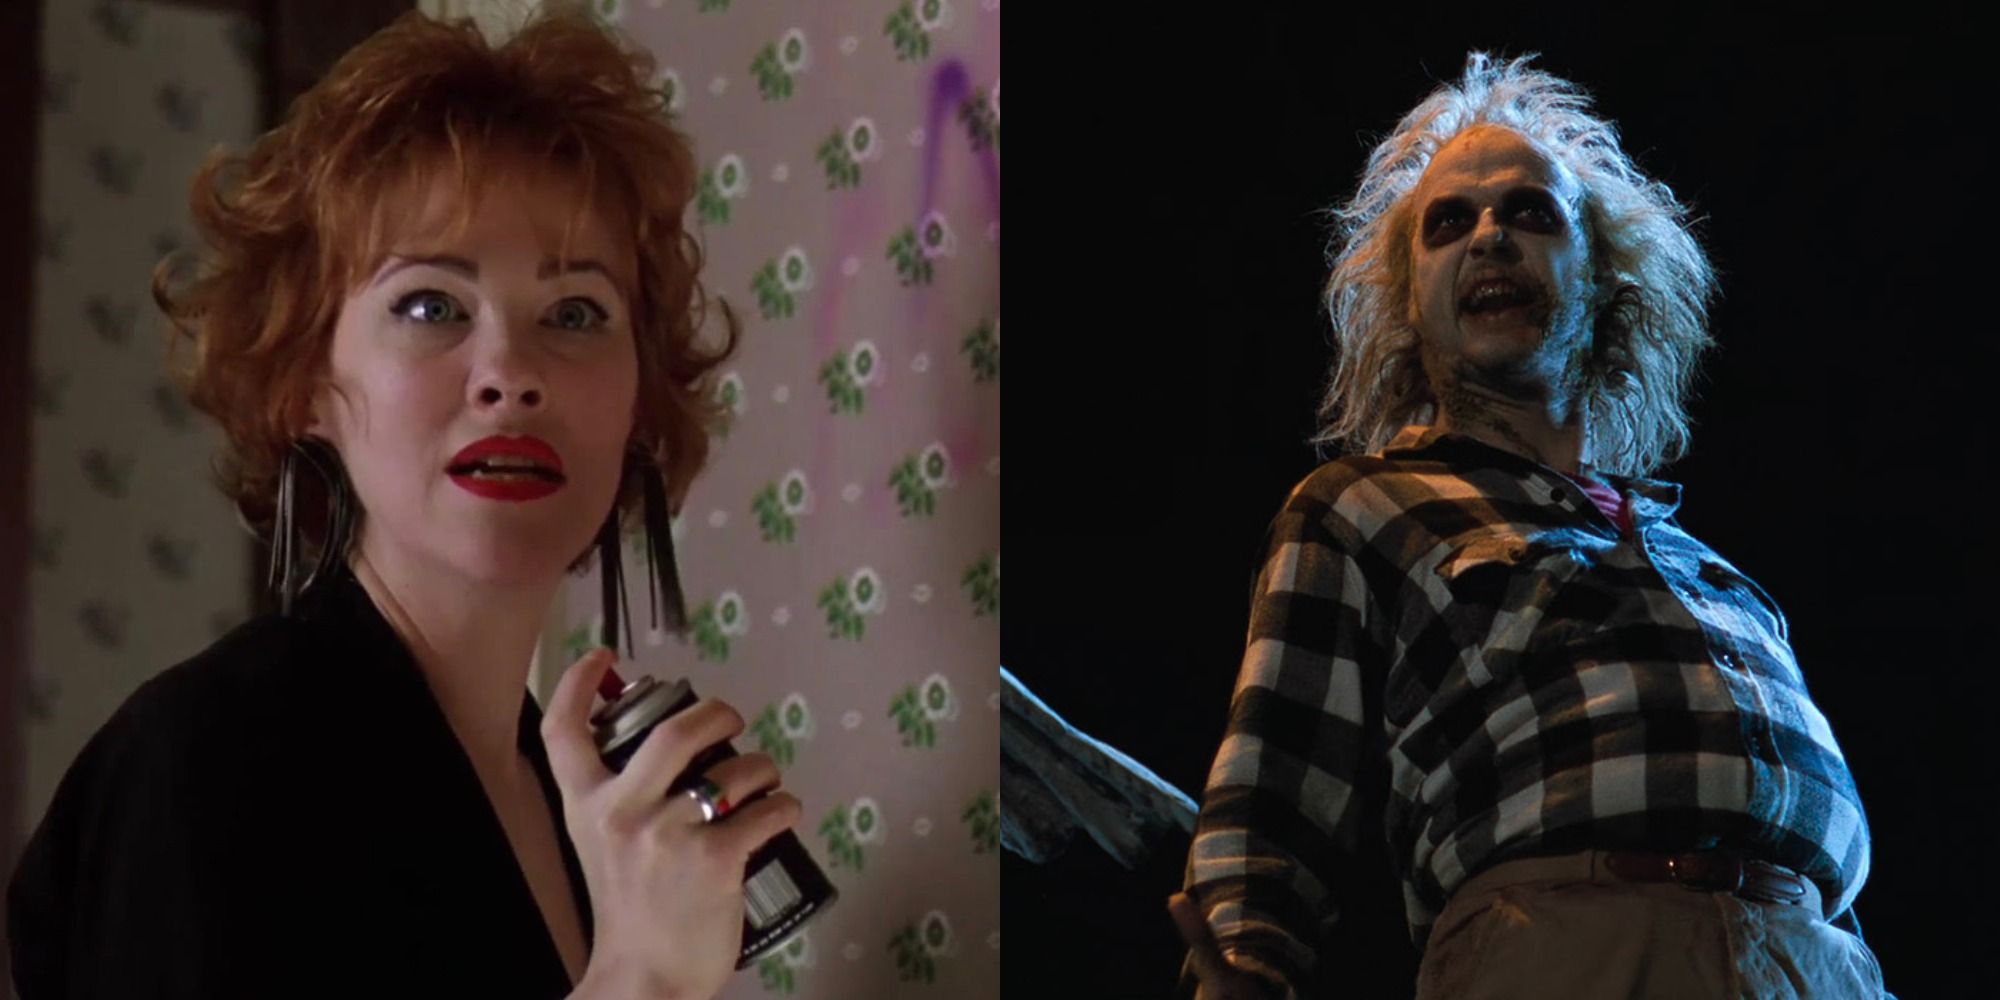 The Greatest Quotes From Beetlejuice